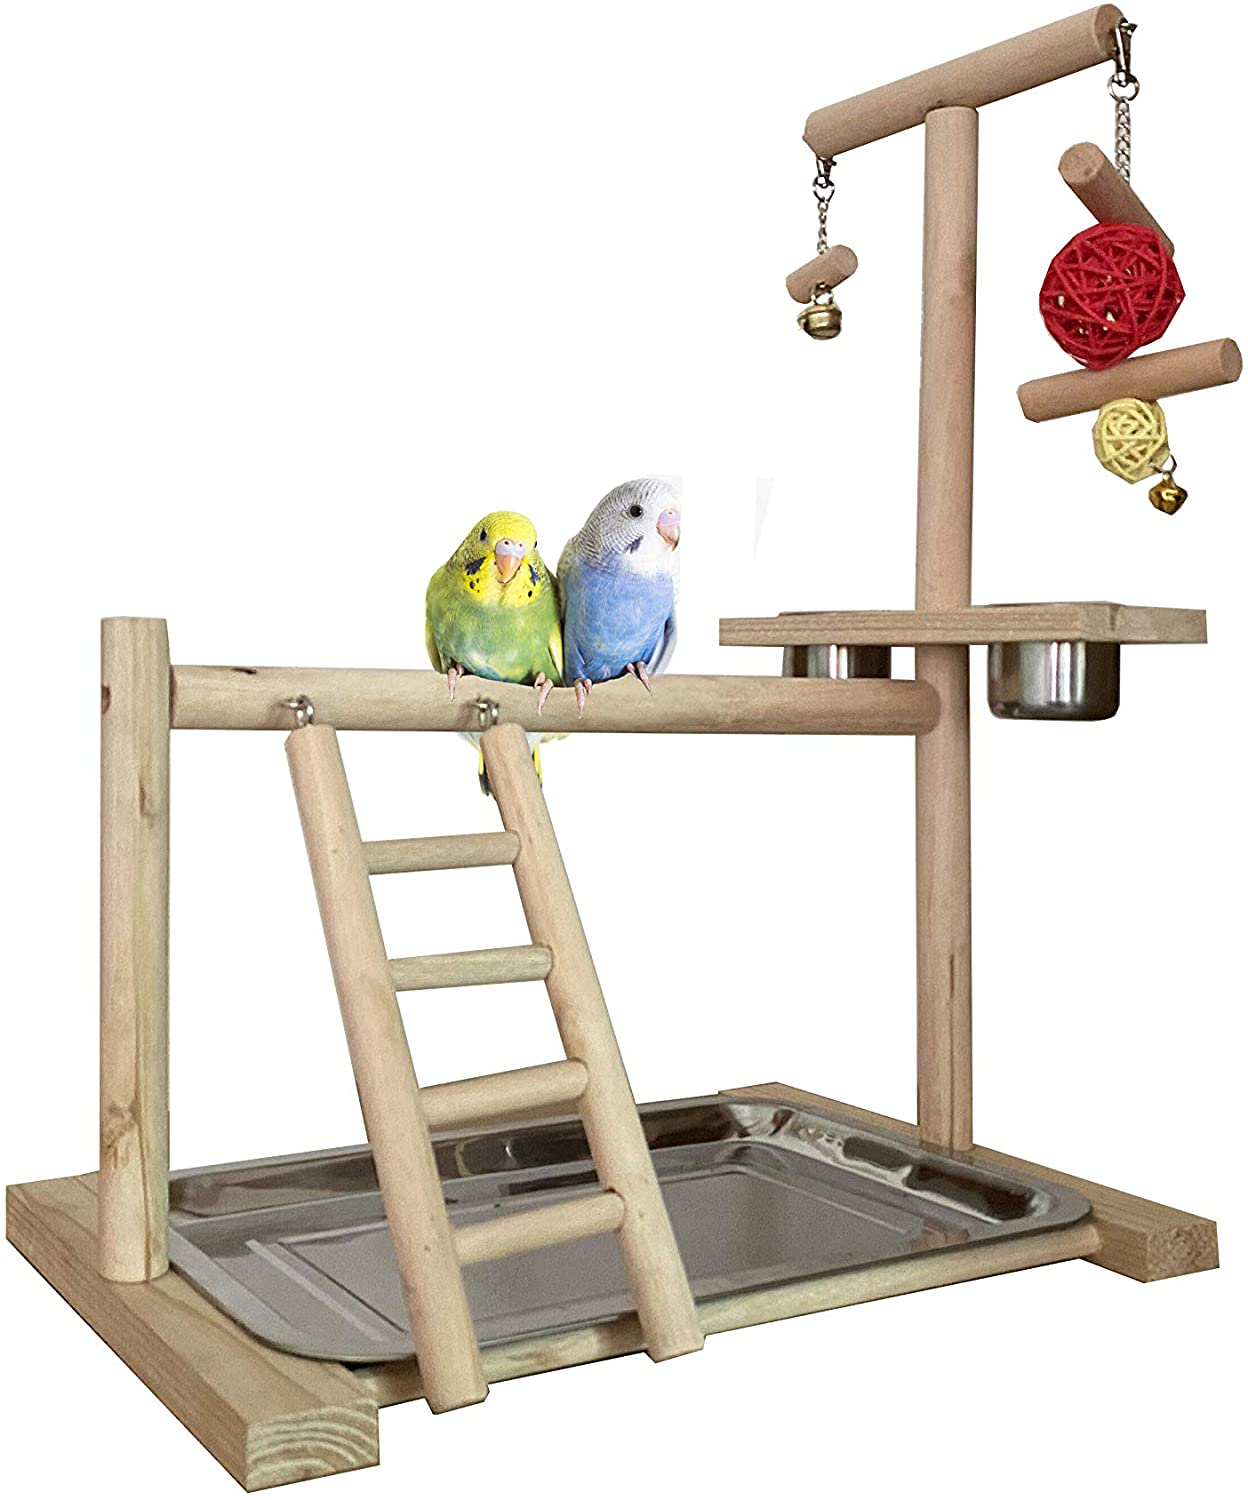 NAPURAL Wyunpets Bird Playground Birdcage Playstand Parrot Play Gym Parakeet Cage Decor Budgie Perch Stand with Feeder Seed Cups Ladder Chew Toys Conure Macaw Cockatiel Finch Small Animals